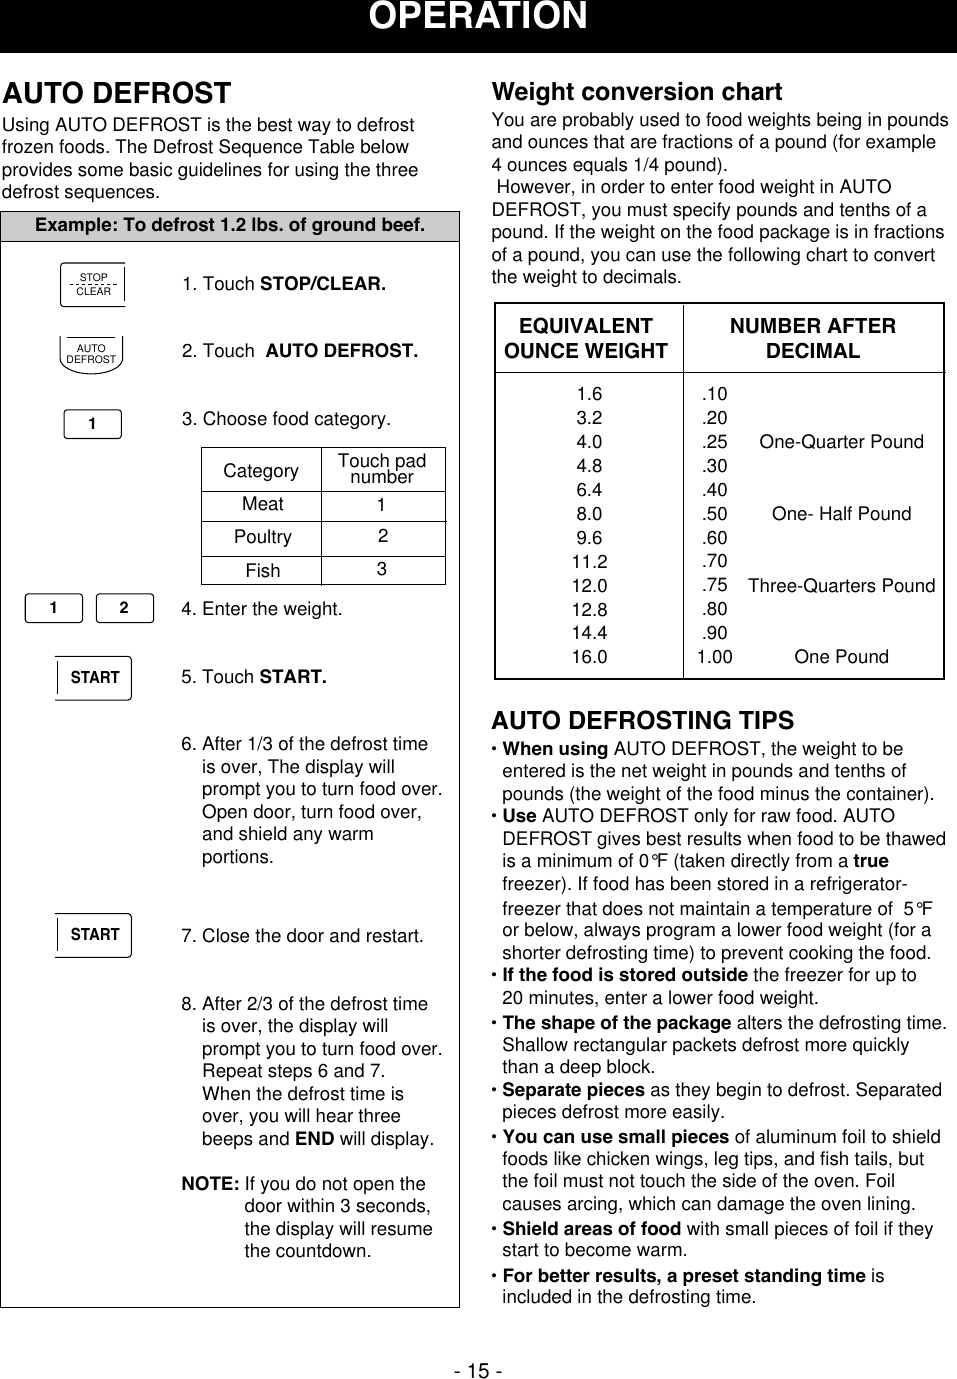 - 15 -OPERATIONWeight conversion chartYou are probably used to food weights being in poundsand ounces that are fractions of a pound (for example4 ounces equals 1/4 pound).However, in order to enter food weight in AUTODEFROST, you must specify pounds and tenths of apound. If the weight on the food package is in fractionsof a pound, you can use the following chart to convertthe weight to decimals.AUTO DEFROSTING TIPS• When using AUTO DEFROST, the weight to beentered is the net weight in pounds and tenths ofpounds (the weight of the food minus the container).• Use AUTO DEFROST only for raw food. AUTODEFROST gives best results when food to be thawedis a minimum of 0°F (taken directly from a truefreezer). If food has been stored in a refrigerator-freezer that does not maintain a temperature of  5°For below, always program a lower food weight (for ashorter defrosting time) to prevent cooking the food. • If the food is stored outside the freezer for up to20 minutes, enter a lower food weight.• The shape of the package alters the defrosting time.Shallow rectangular packets defrost more quicklythan a deep block.• Separate pieces as they begin to defrost. Separatedpieces defrost more easily.• You can use small pieces of aluminum foil to shieldfoods like chicken wings, leg tips, and fish tails, butthe foil must not touch the side of the oven. Foilcauses arcing, which can damage the oven lining.• Shield areas of food with small pieces of foil if theystart to become warm.• For better results, a preset standing time isincluded in the defrosting time.NUMBER AFTERDECIMALEQUIVALENTOUNCE WEIGHT.10.20.25.30.40.50.60.70.75.80.901.001.63.24.04.86.48.09.611.212.012.814.416.0One-Quarter PoundOne- Half PoundThree-Quarters PoundOne PoundAUTO DEFROSTUsing AUTO DEFROST is the best way to defrostfrozen foods. The Defrost Sequence Table belowprovides some basic guidelines for using the threedefrost sequences. 1. Touch STOP/CLEAR.2. Touch  AUTO DEFROST.3. Choose food category.Example: To defrost 1.2 lbs. of ground beef.CategoryMeatPoultryFishTouch padnumber1234. Enter the weight.5. Touch START.6. After 1/3 of the defrost timeis over, The display willprompt you to turn food over.Open door, turn food over,and shield any warmportions.7. Close the door and restart.8. After 2/3 of the defrost timeis over, the display willprompt you to turn food over.Repeat steps 6 and 7.When the defrost time isover, you will hear threebeeps and END will display.NOTE: If you do not open thedoor within 3 seconds,the display will resumethe countdown.STOPCLEARAUTODEFROSTSTARTSTART1!1!2!